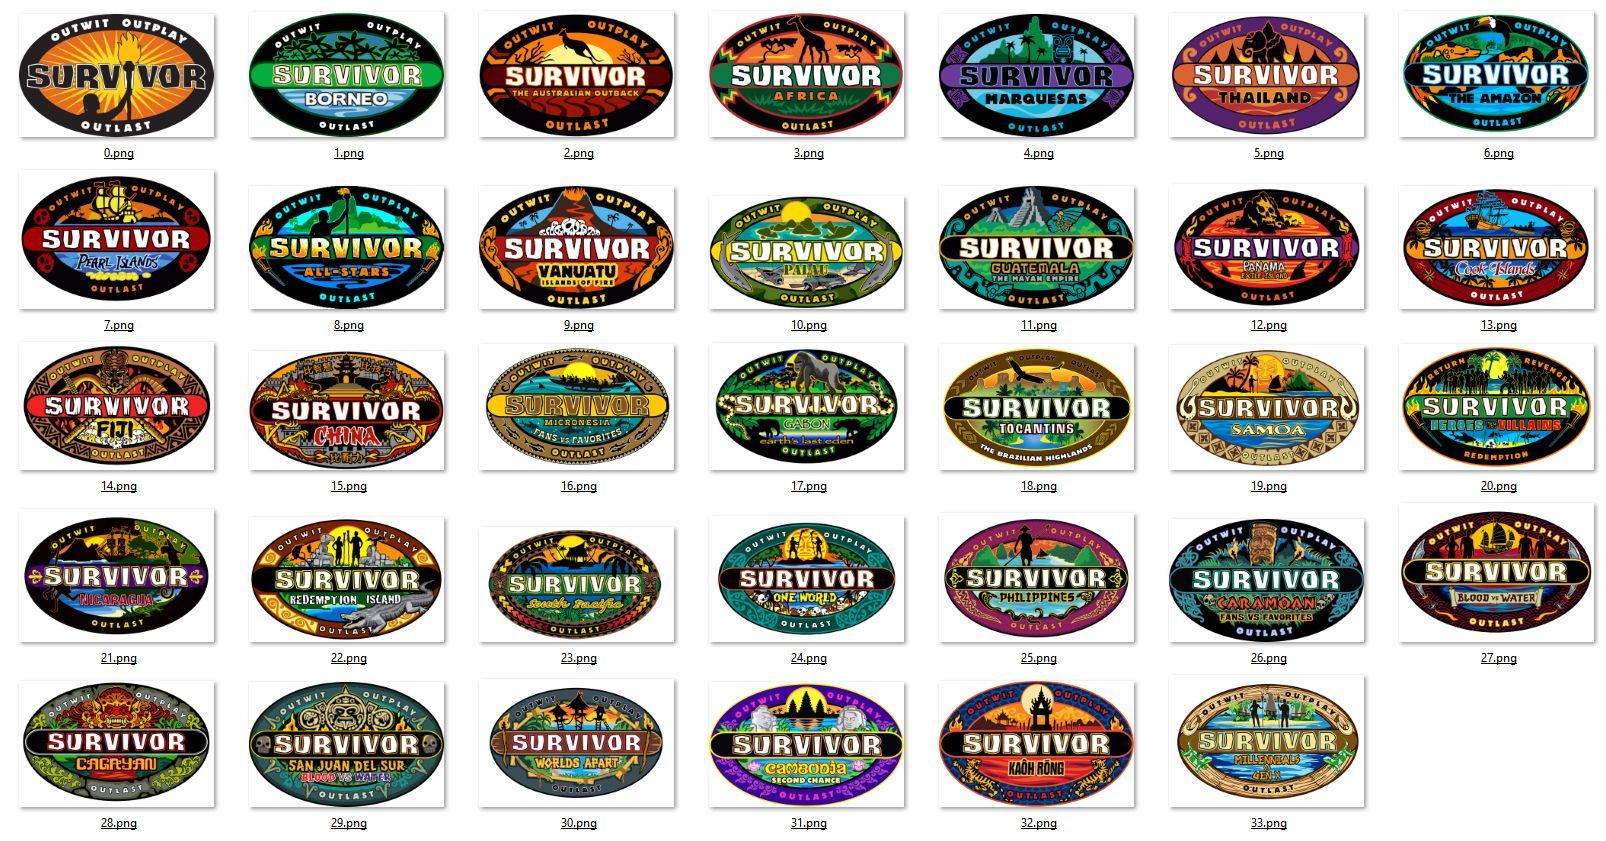 Survivor Logo - What sites are logos sourced from? Also, Survivor logos in here ...